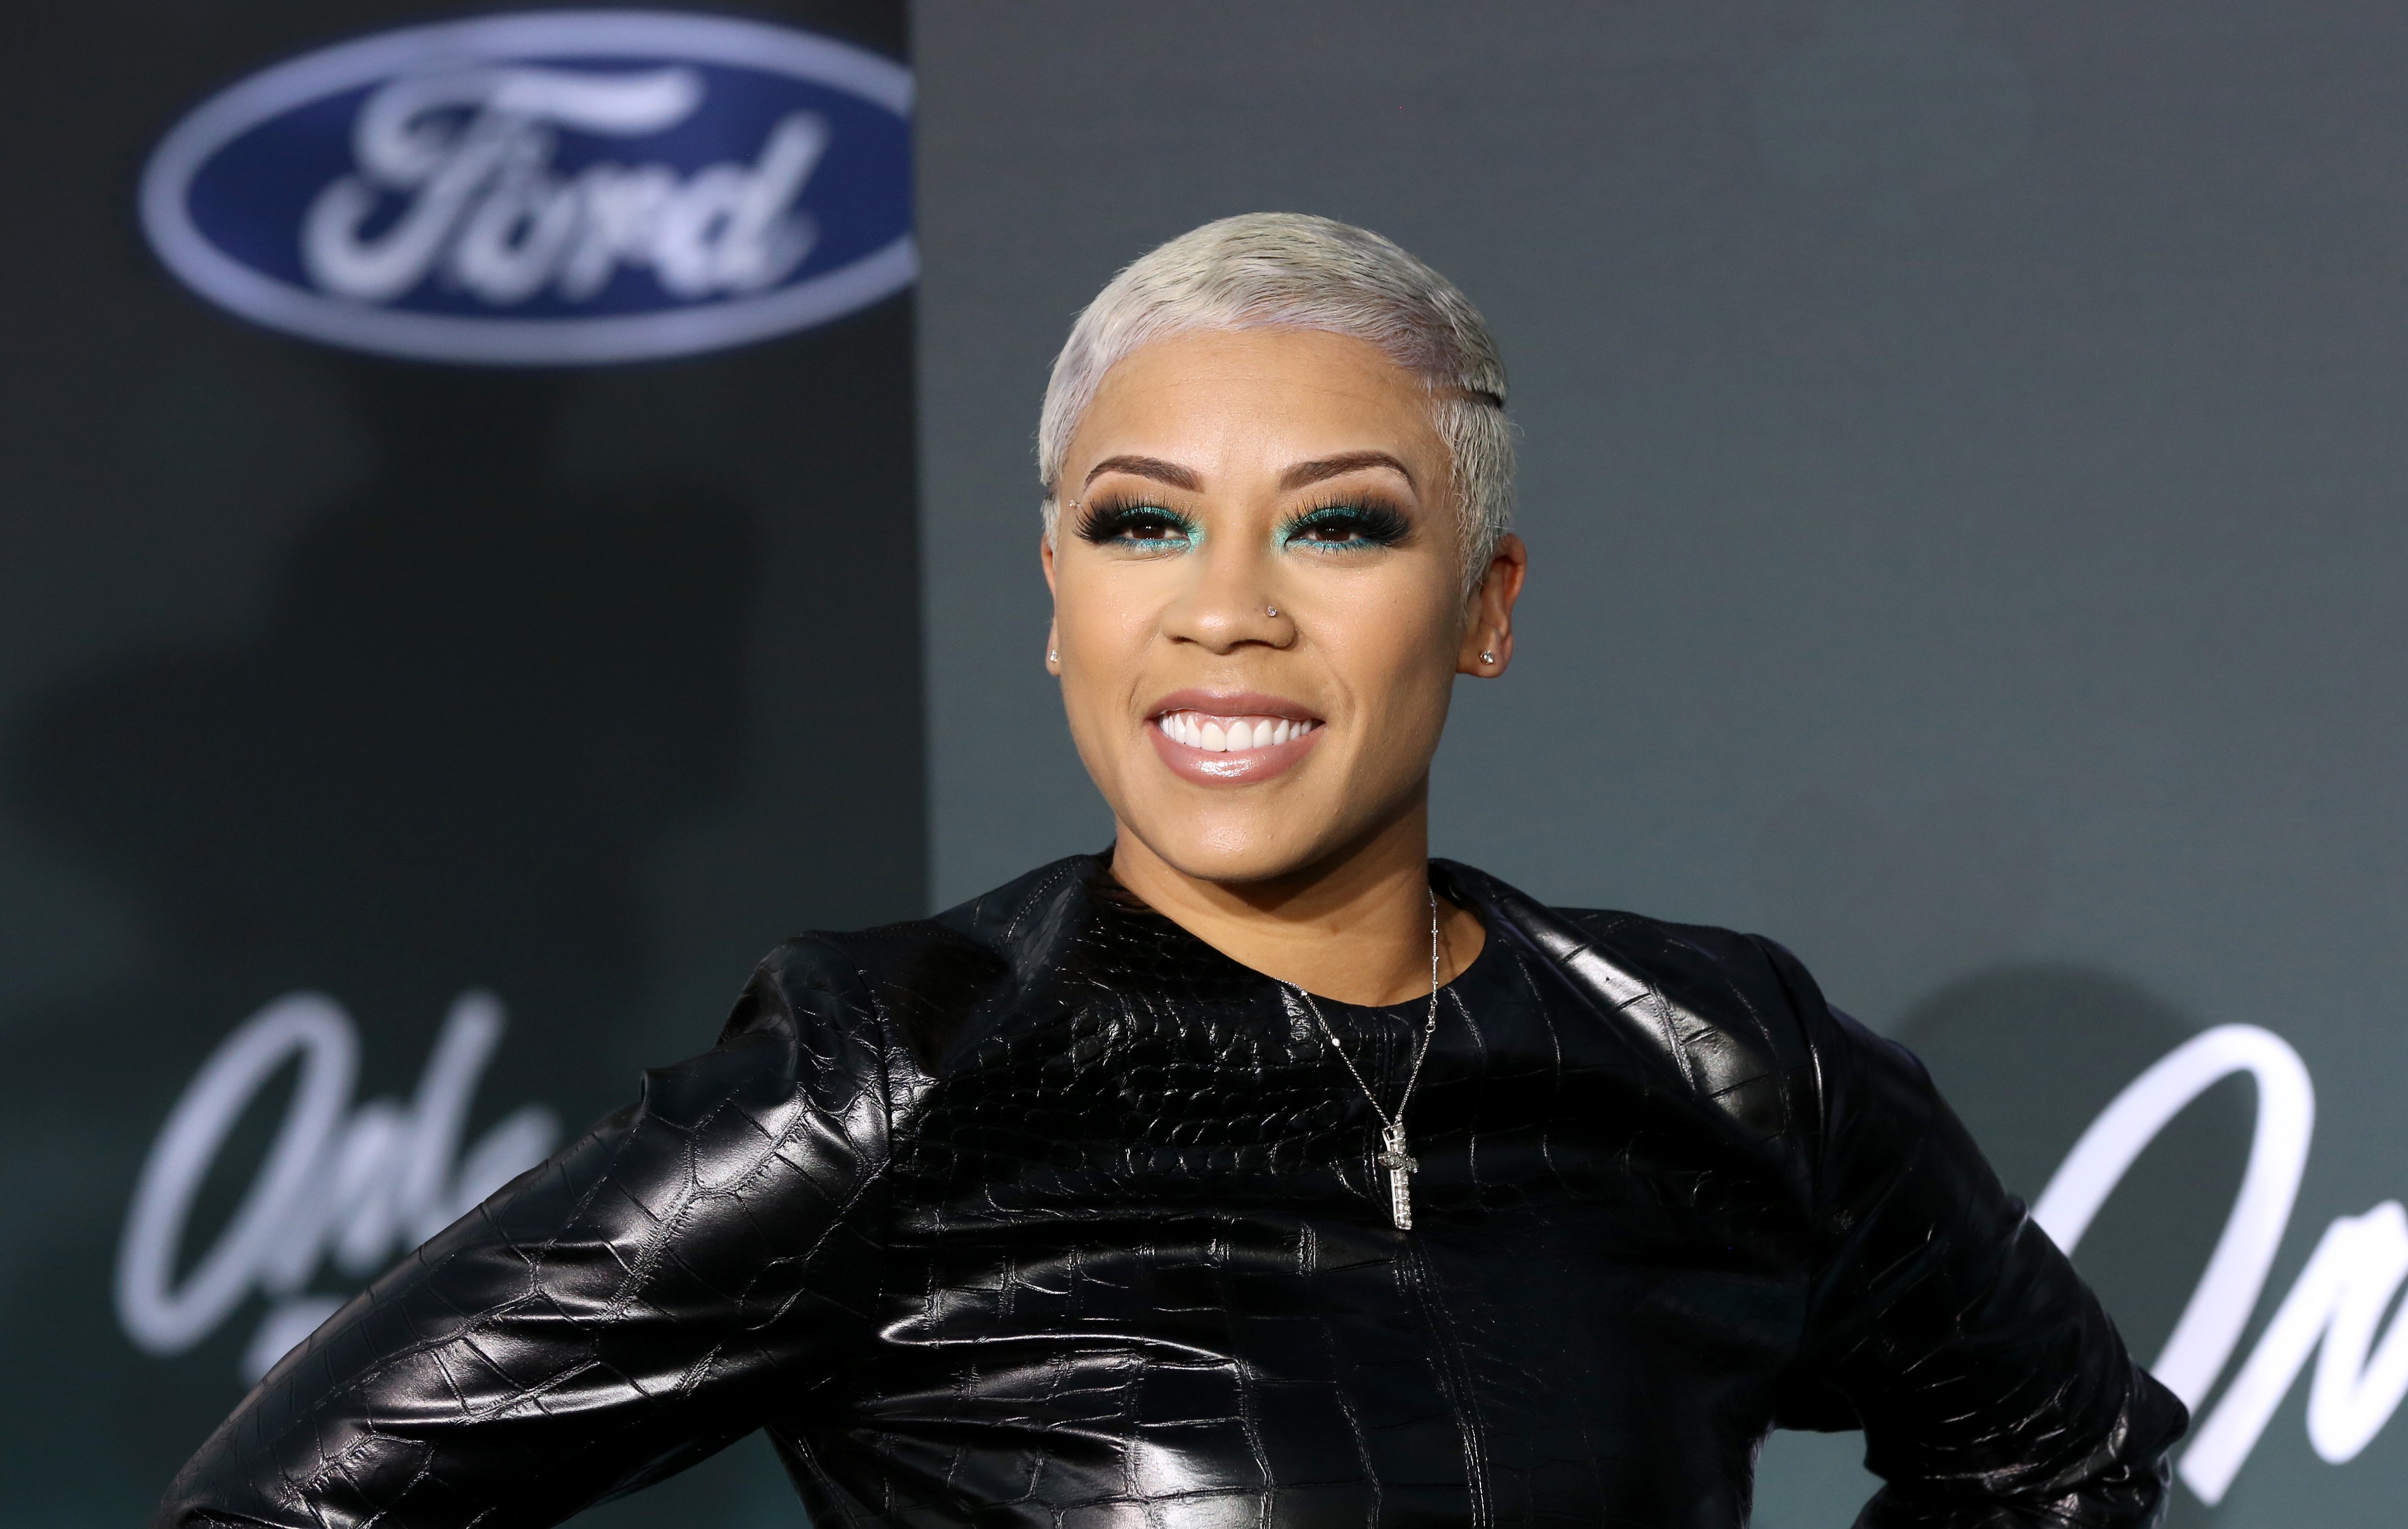 Keyshia Cole at the Soul Train Awards on Nov. 17, 2019 in Las Vegas | Photo: Getty Images